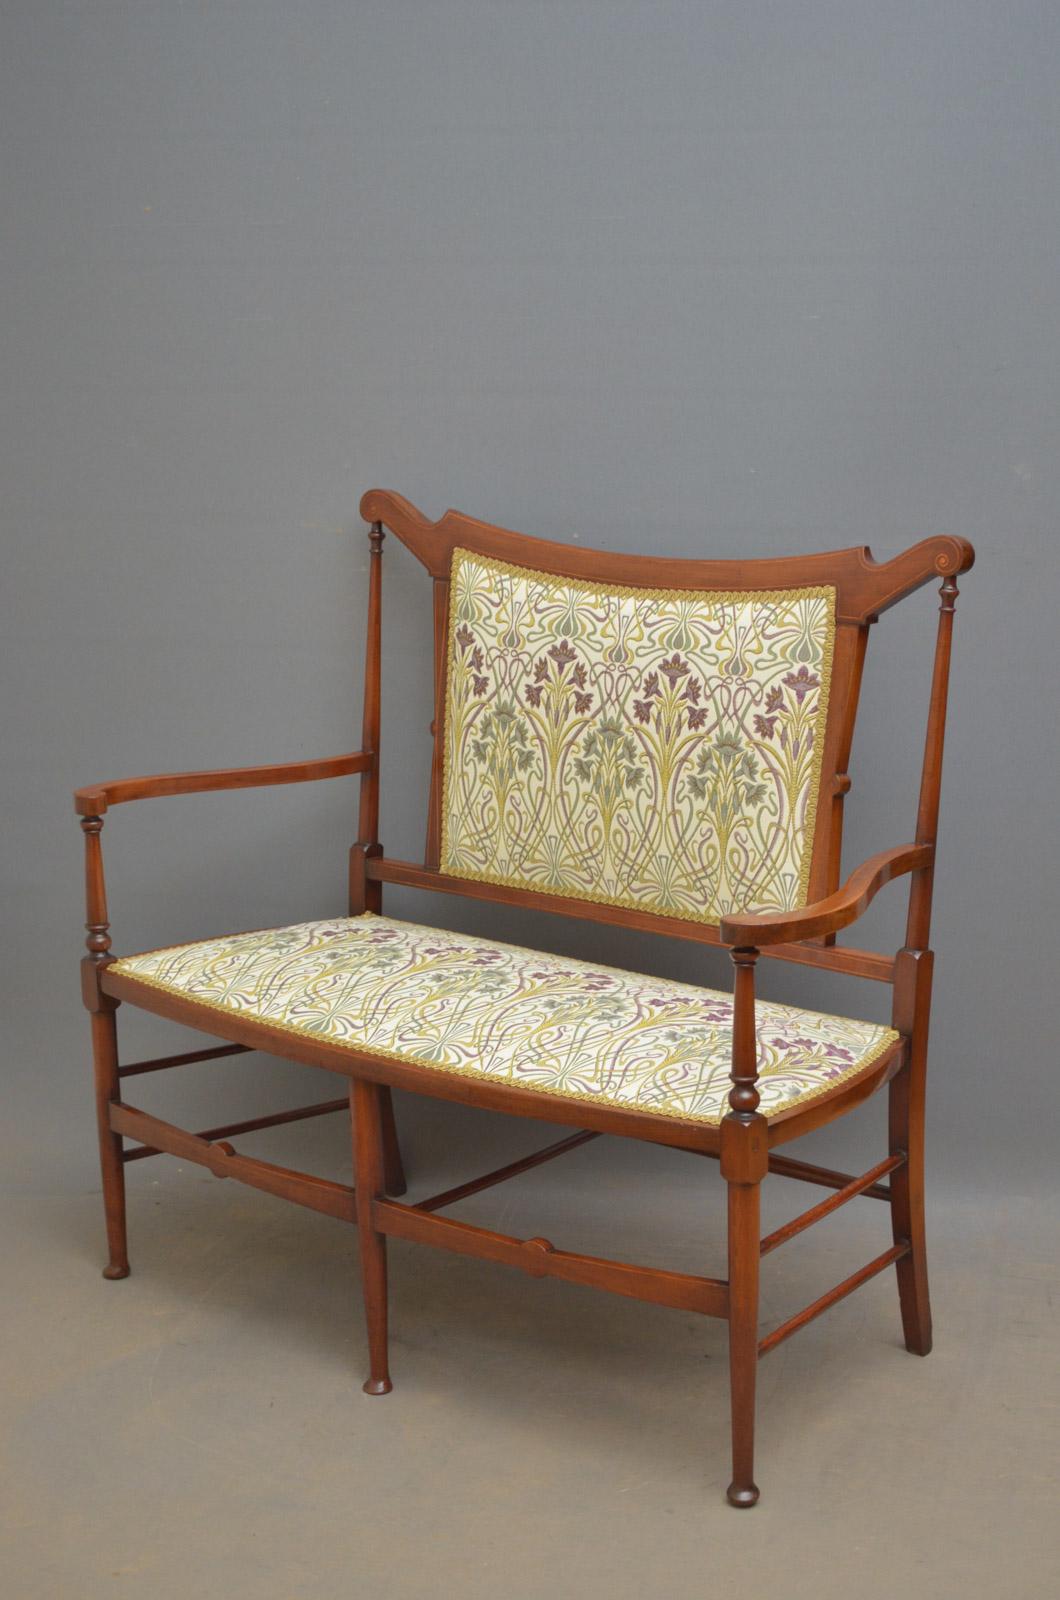 Sn4428, stylish Art Nouveau sofa, having shaped and inlaid top rail and, open arms and upholstered back and seat, covered in William Morris style fabric, standing on slender, turned legs and pad feet. This antique settee has been sympathetically